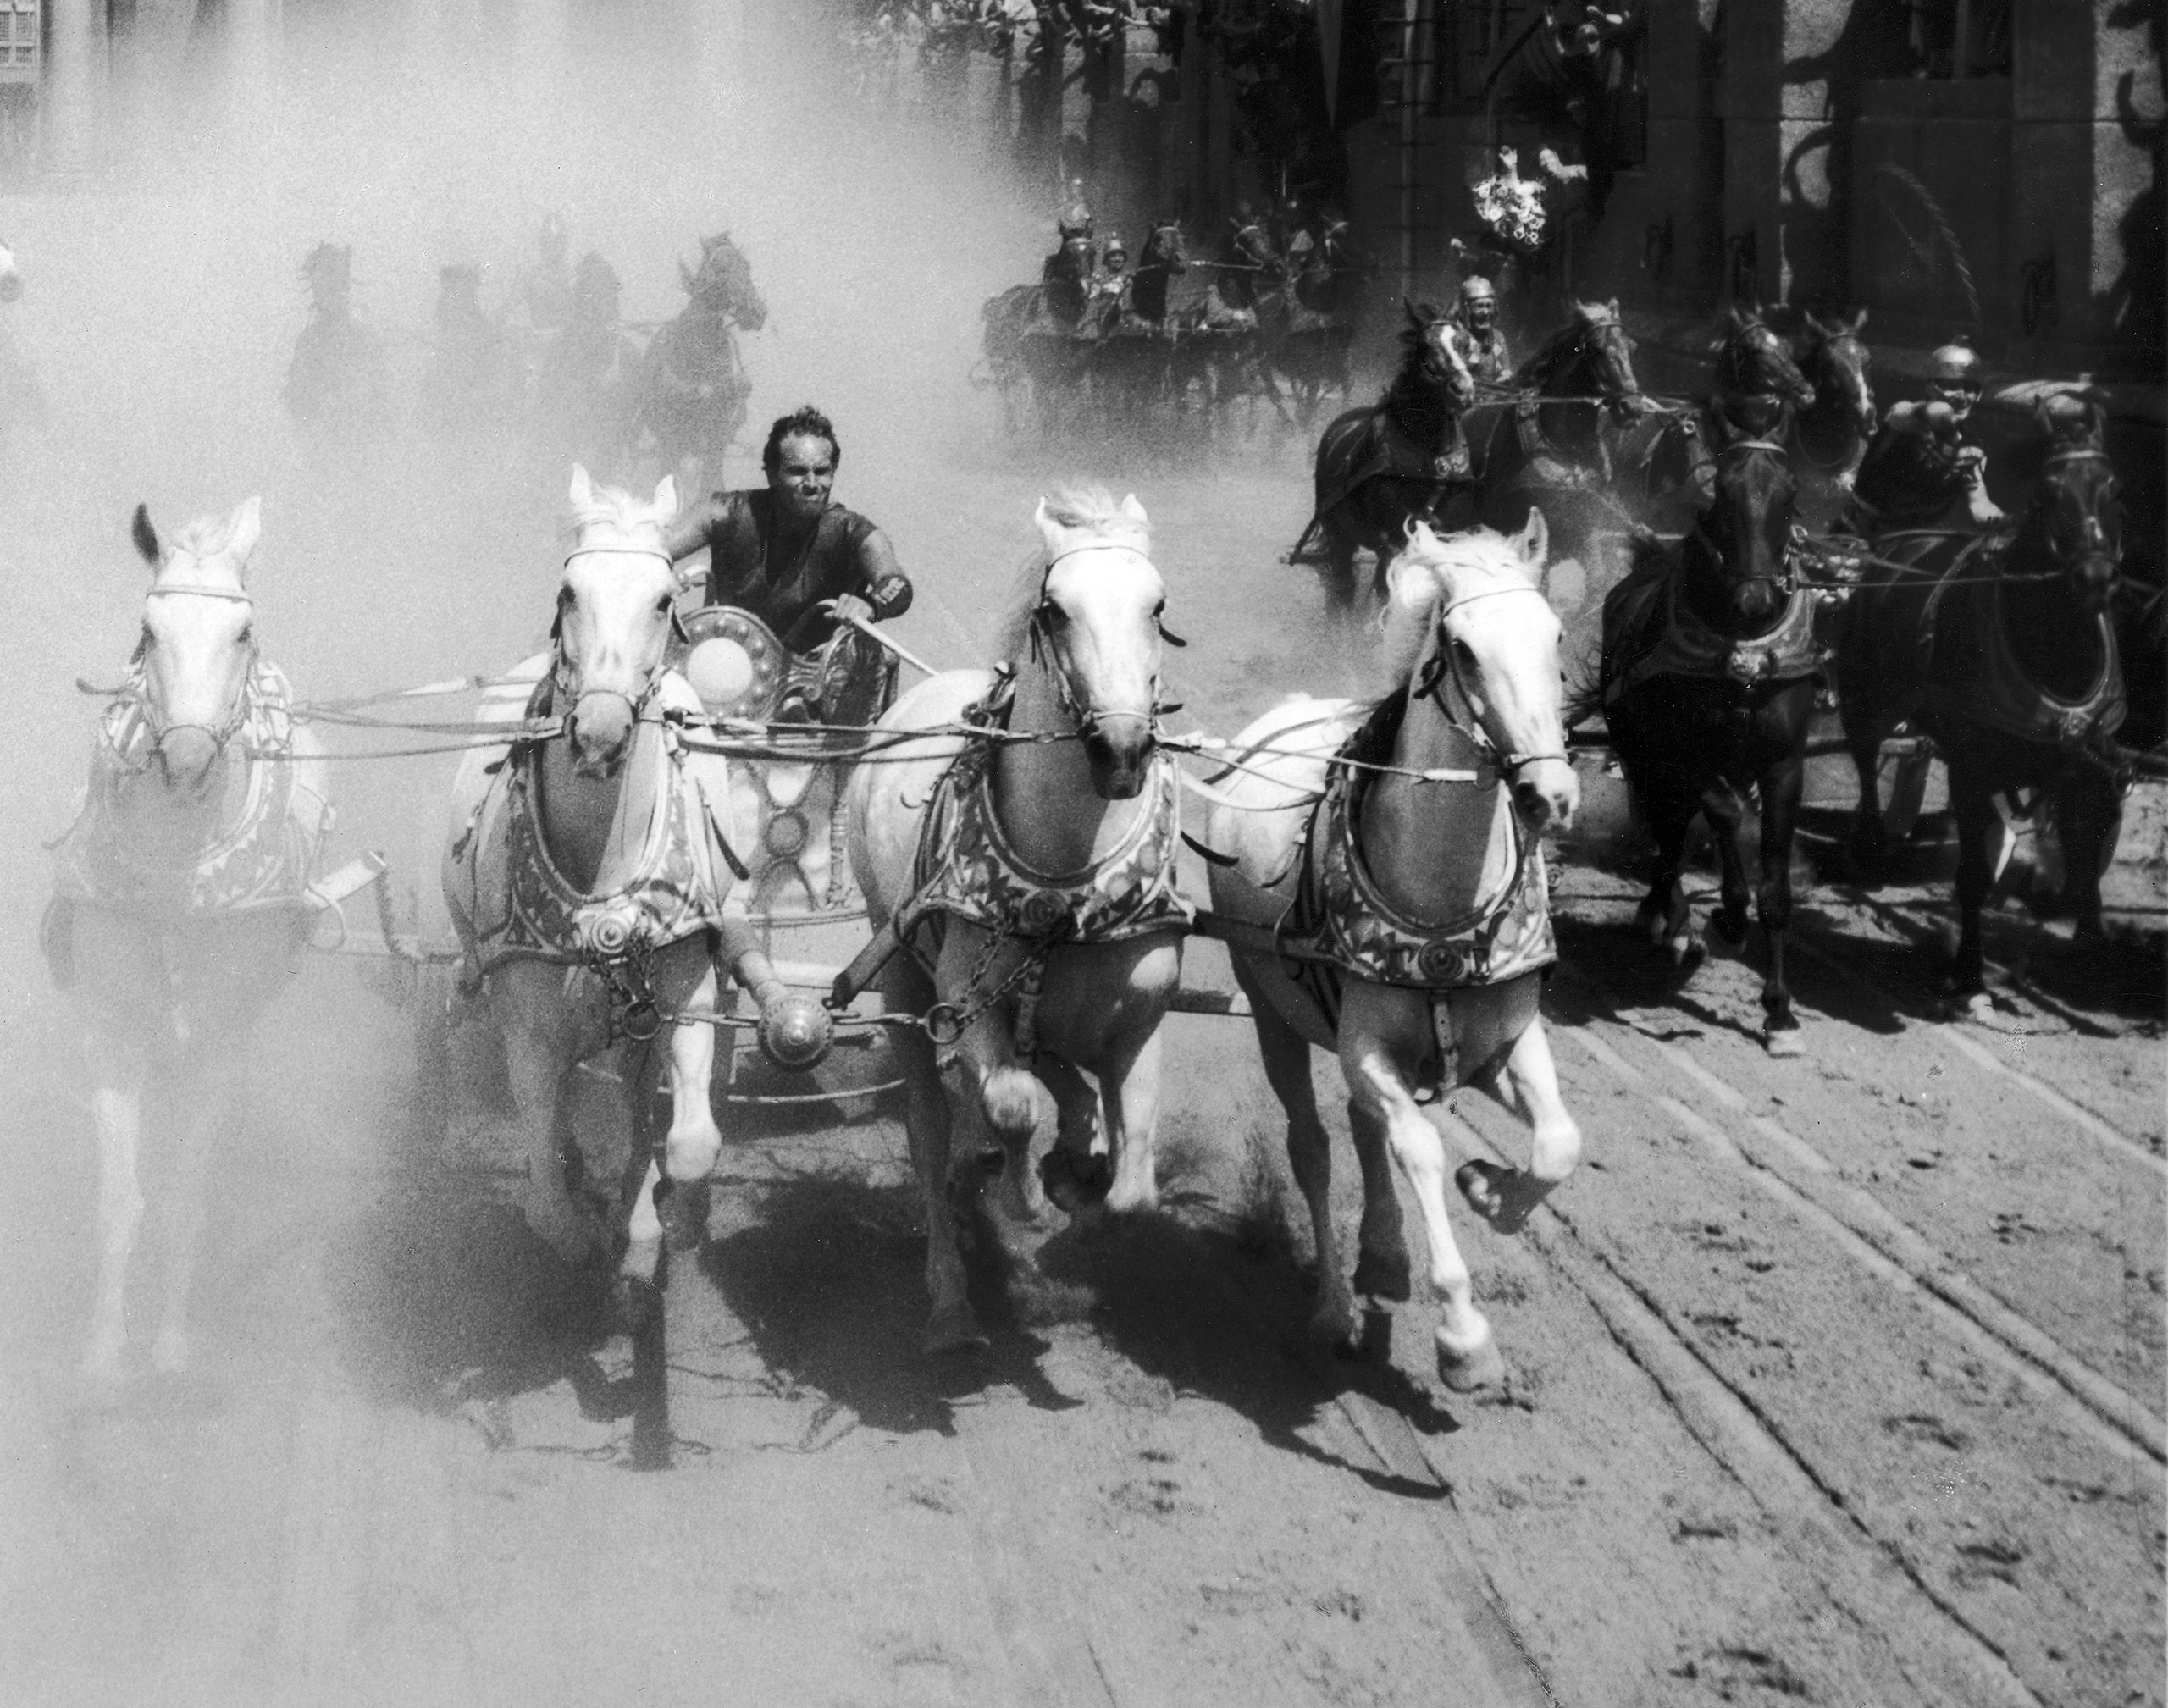 Charlton Heston competes in a chariot race in a still from the film Ben-Hur, directed by William Wyler.